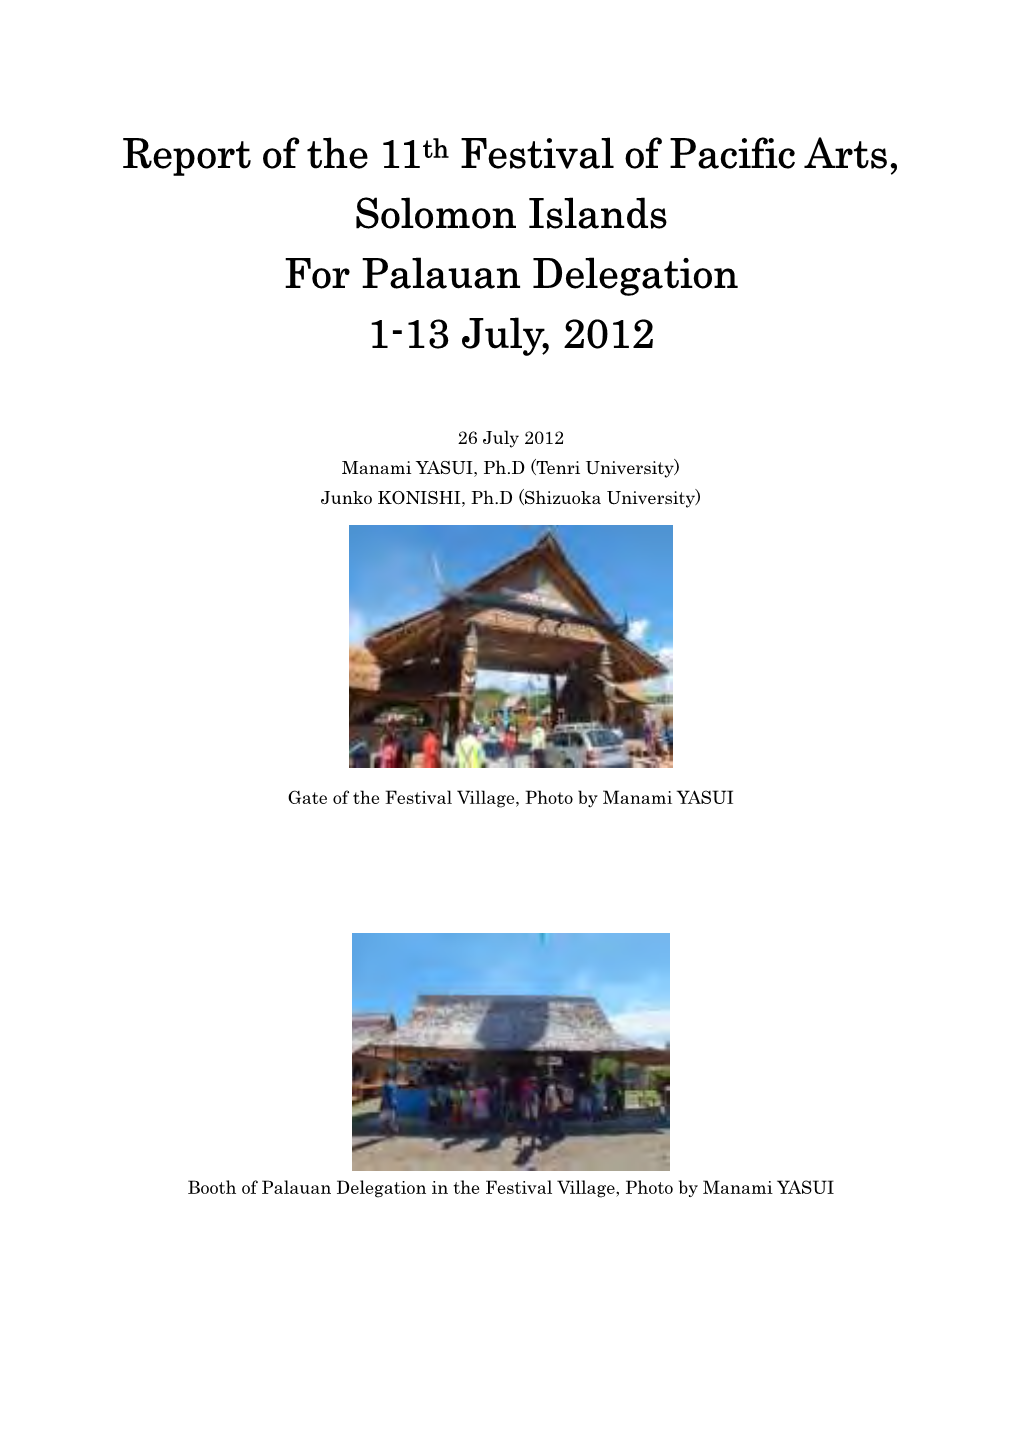 Report of the 11Th Festival of Pacific Arts, Solomon Islands for Palauan Delegation 1-13 July, 2012